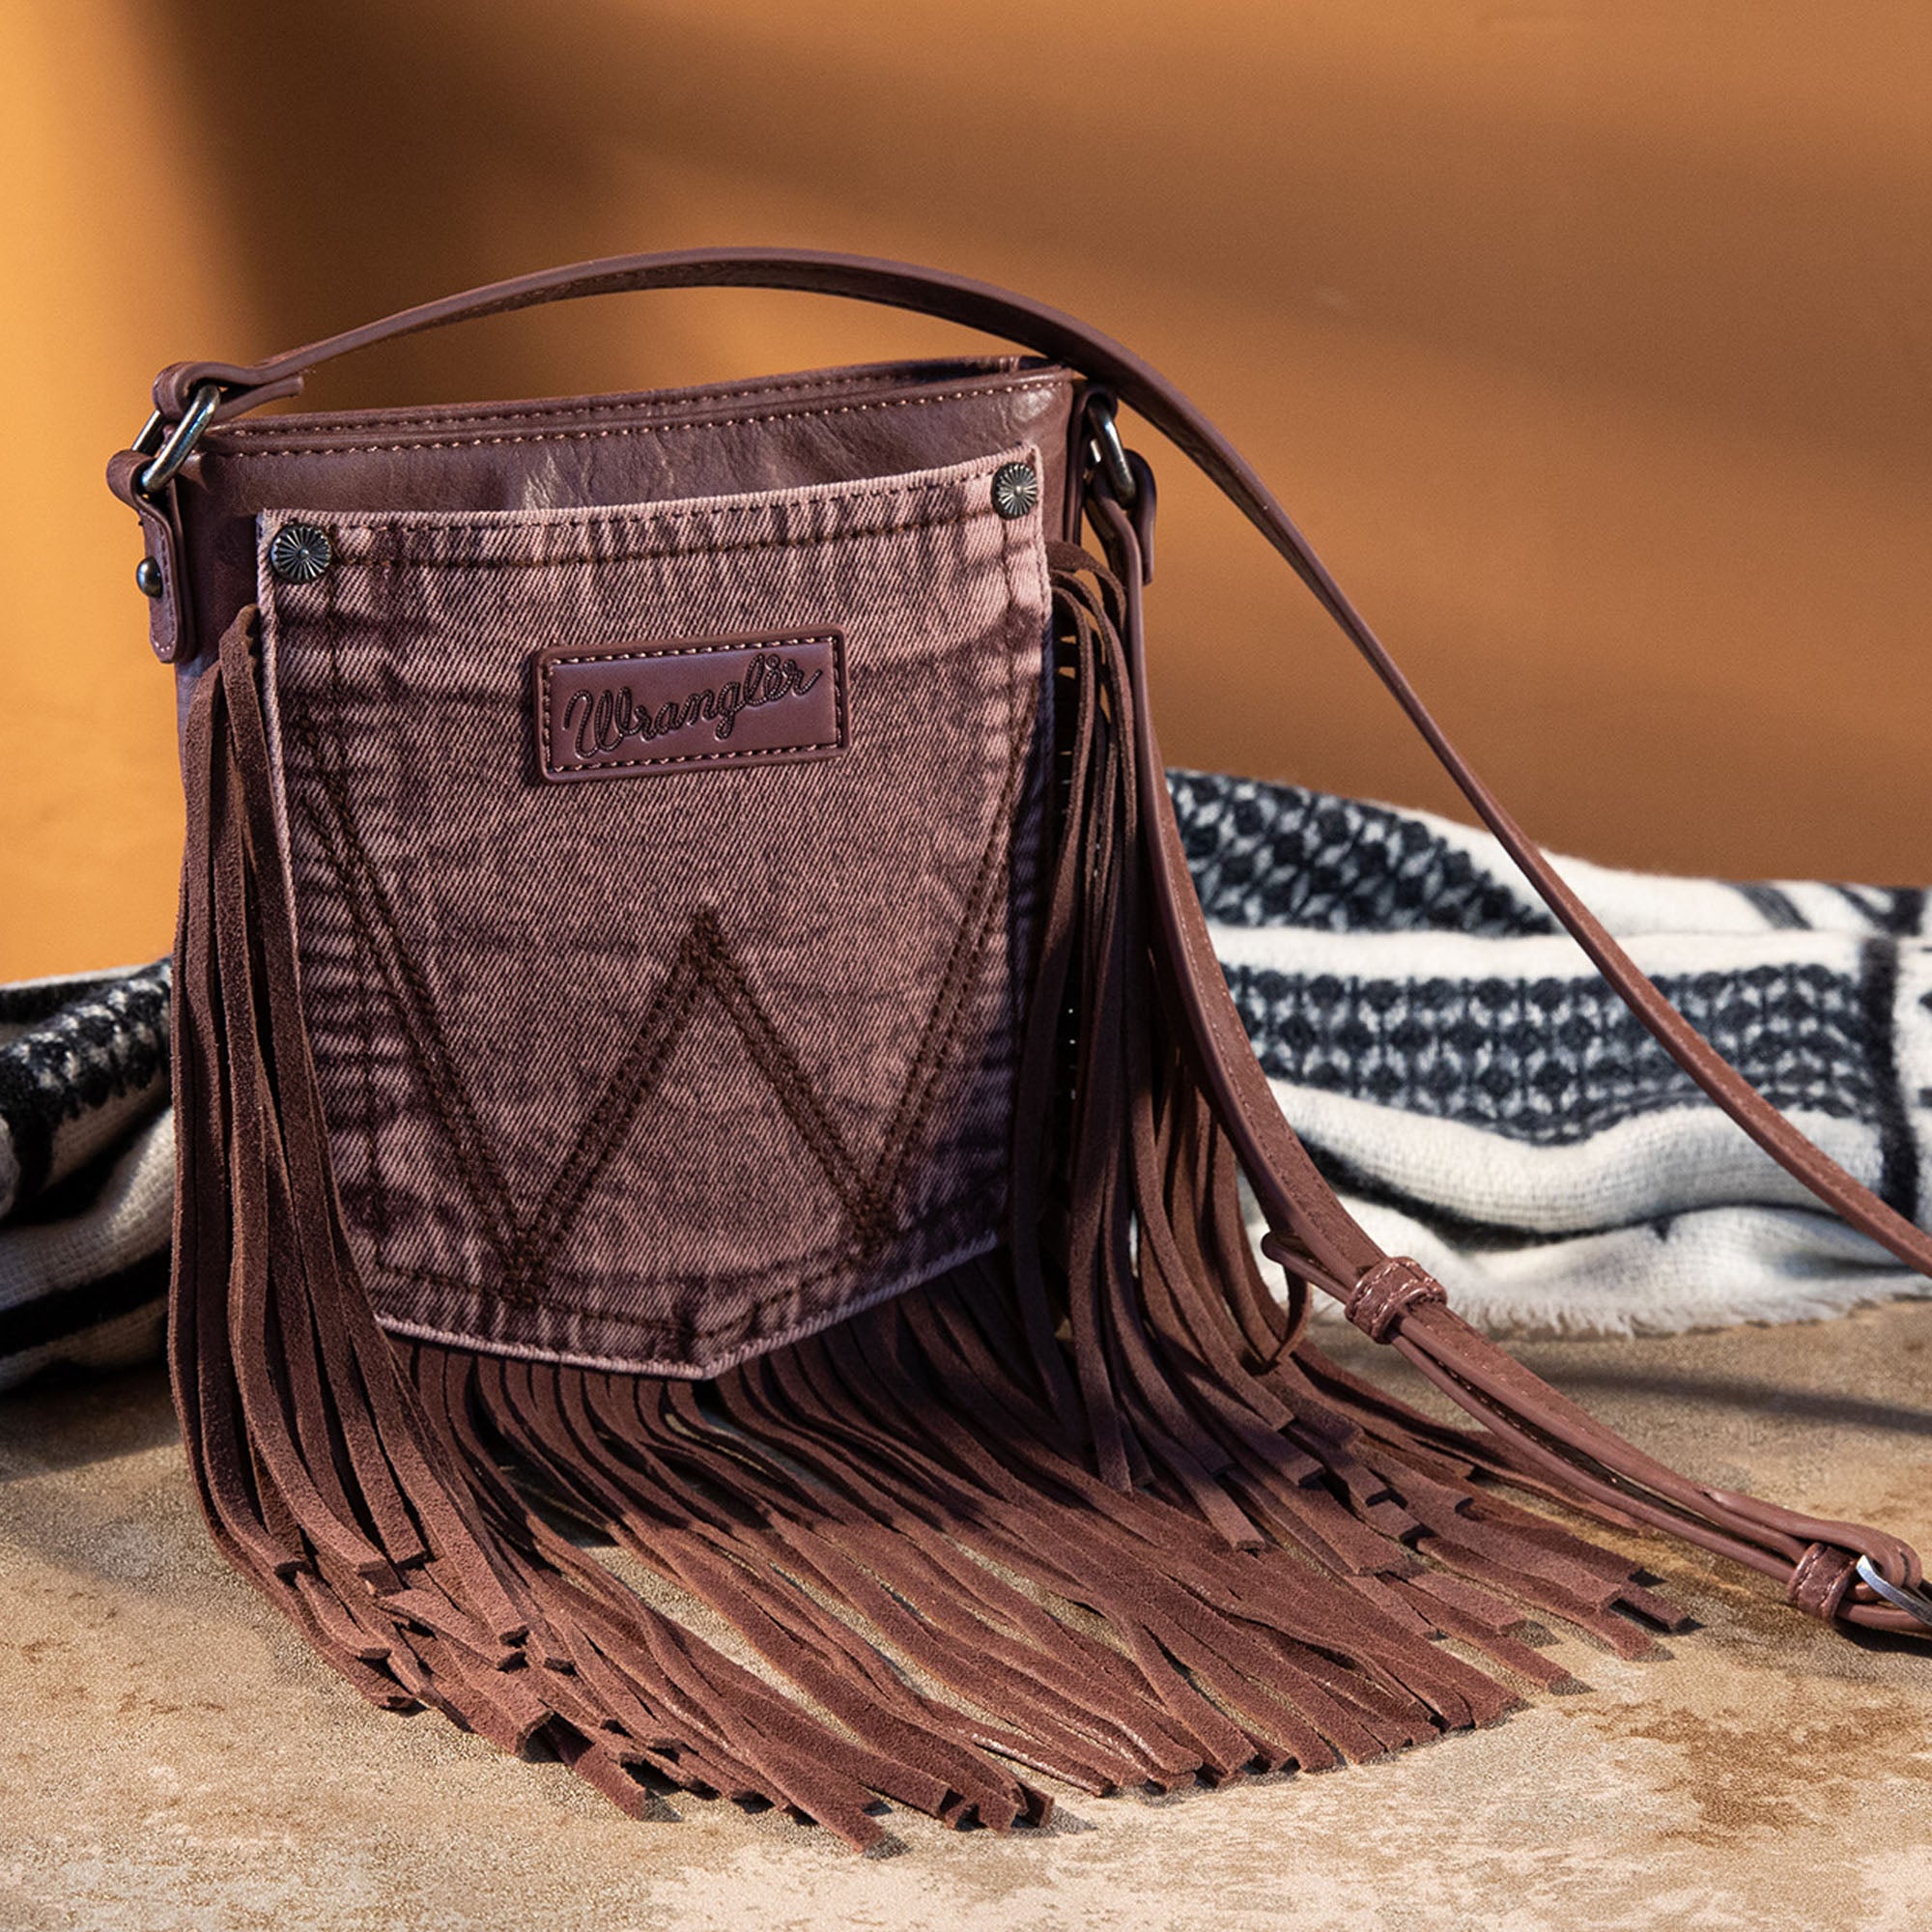 Western Leather Crossbody Bag With Leather Fringe, Aztec Cowhide Bag Purse  Tote Country Western Southern Cowhide Western Gift Hobo Bag - Etsy